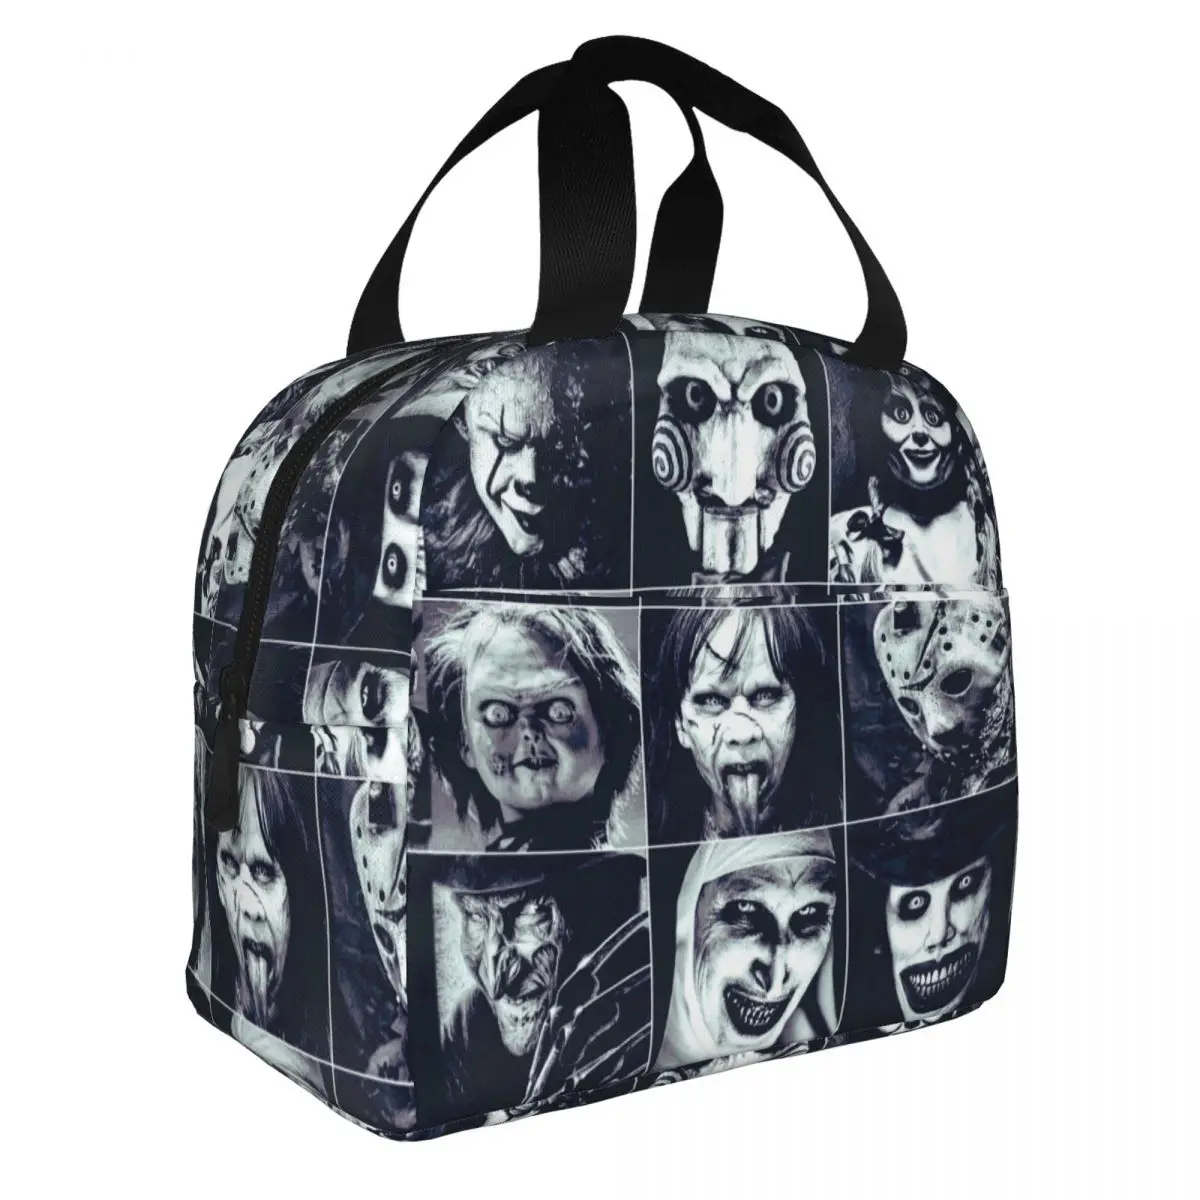 

Horror Movie Gothic Insulated Lunch Bag Large Scream Team Chucky Meal Container Thermal Bag Tote Lunch Box Travel Food Handbags